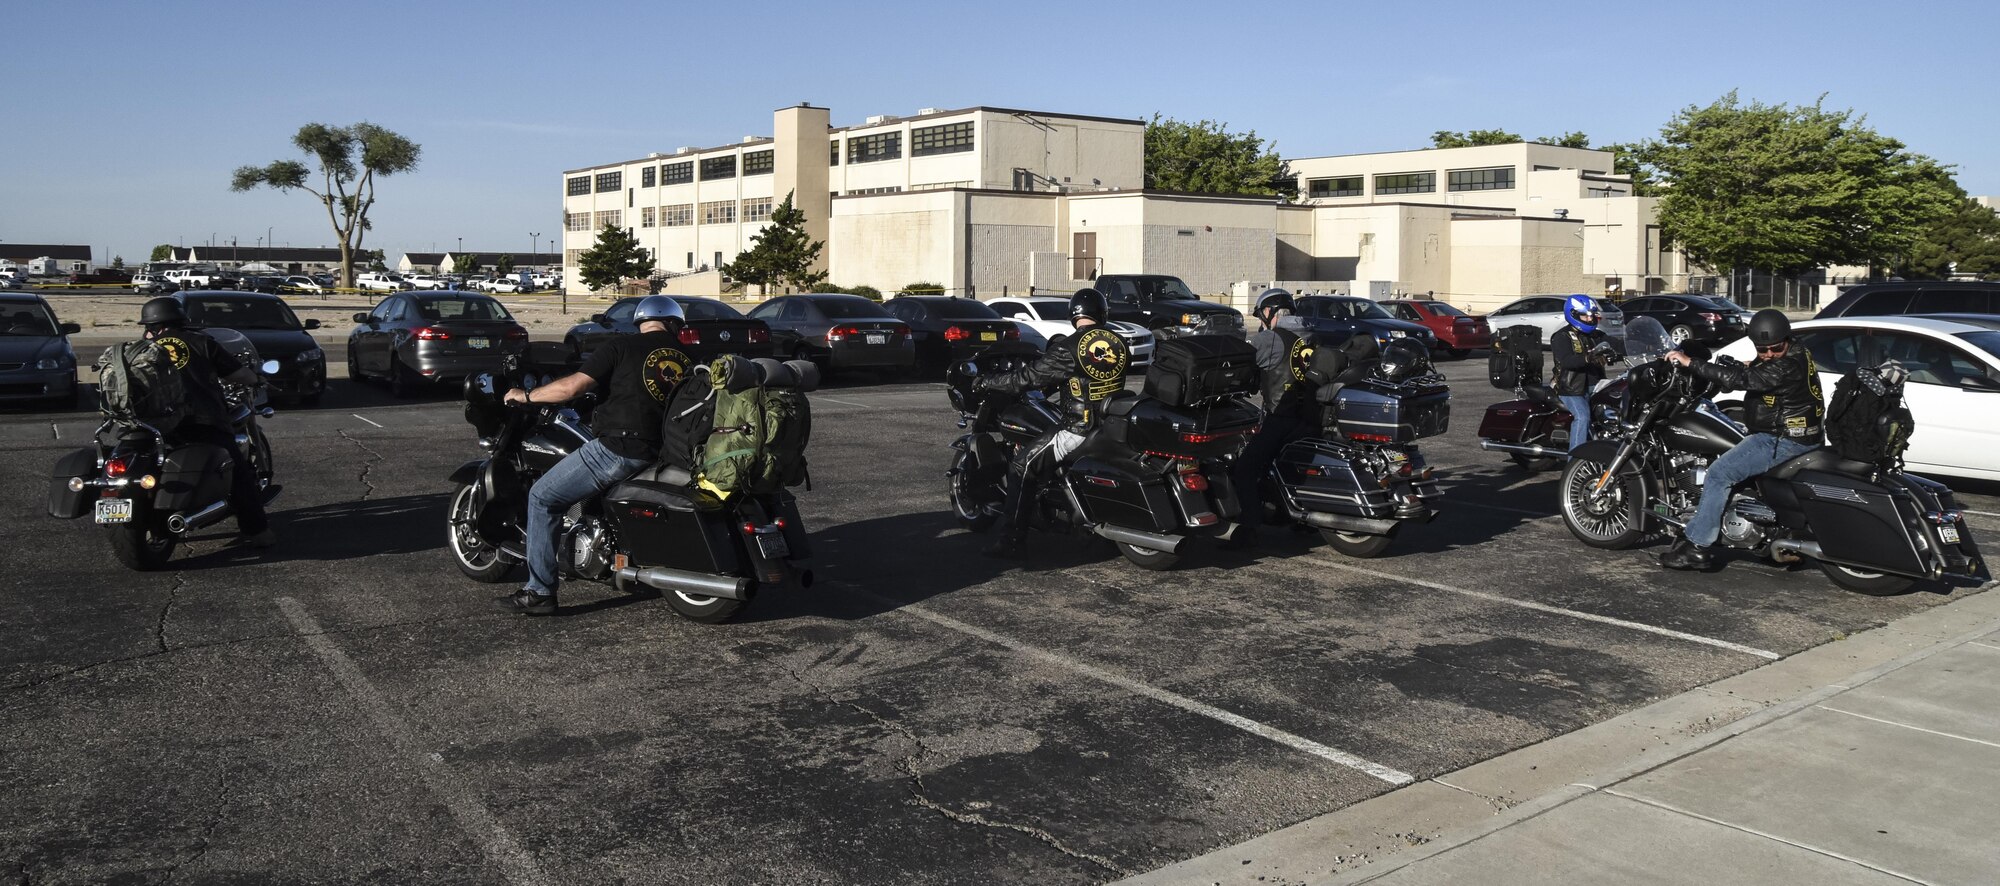 Members of the Combat Veterans Motorcycle Association park their bikes in front of the Thunderbird Inn dining facility on Kirtland Air Force Base, May 30, 2017. The veterans spoke with Team Kirtland airmen about suicide prevention and having each other’s backs in all situations. (U.S. Air Force Photo/Senior Airman Chandler Baker)